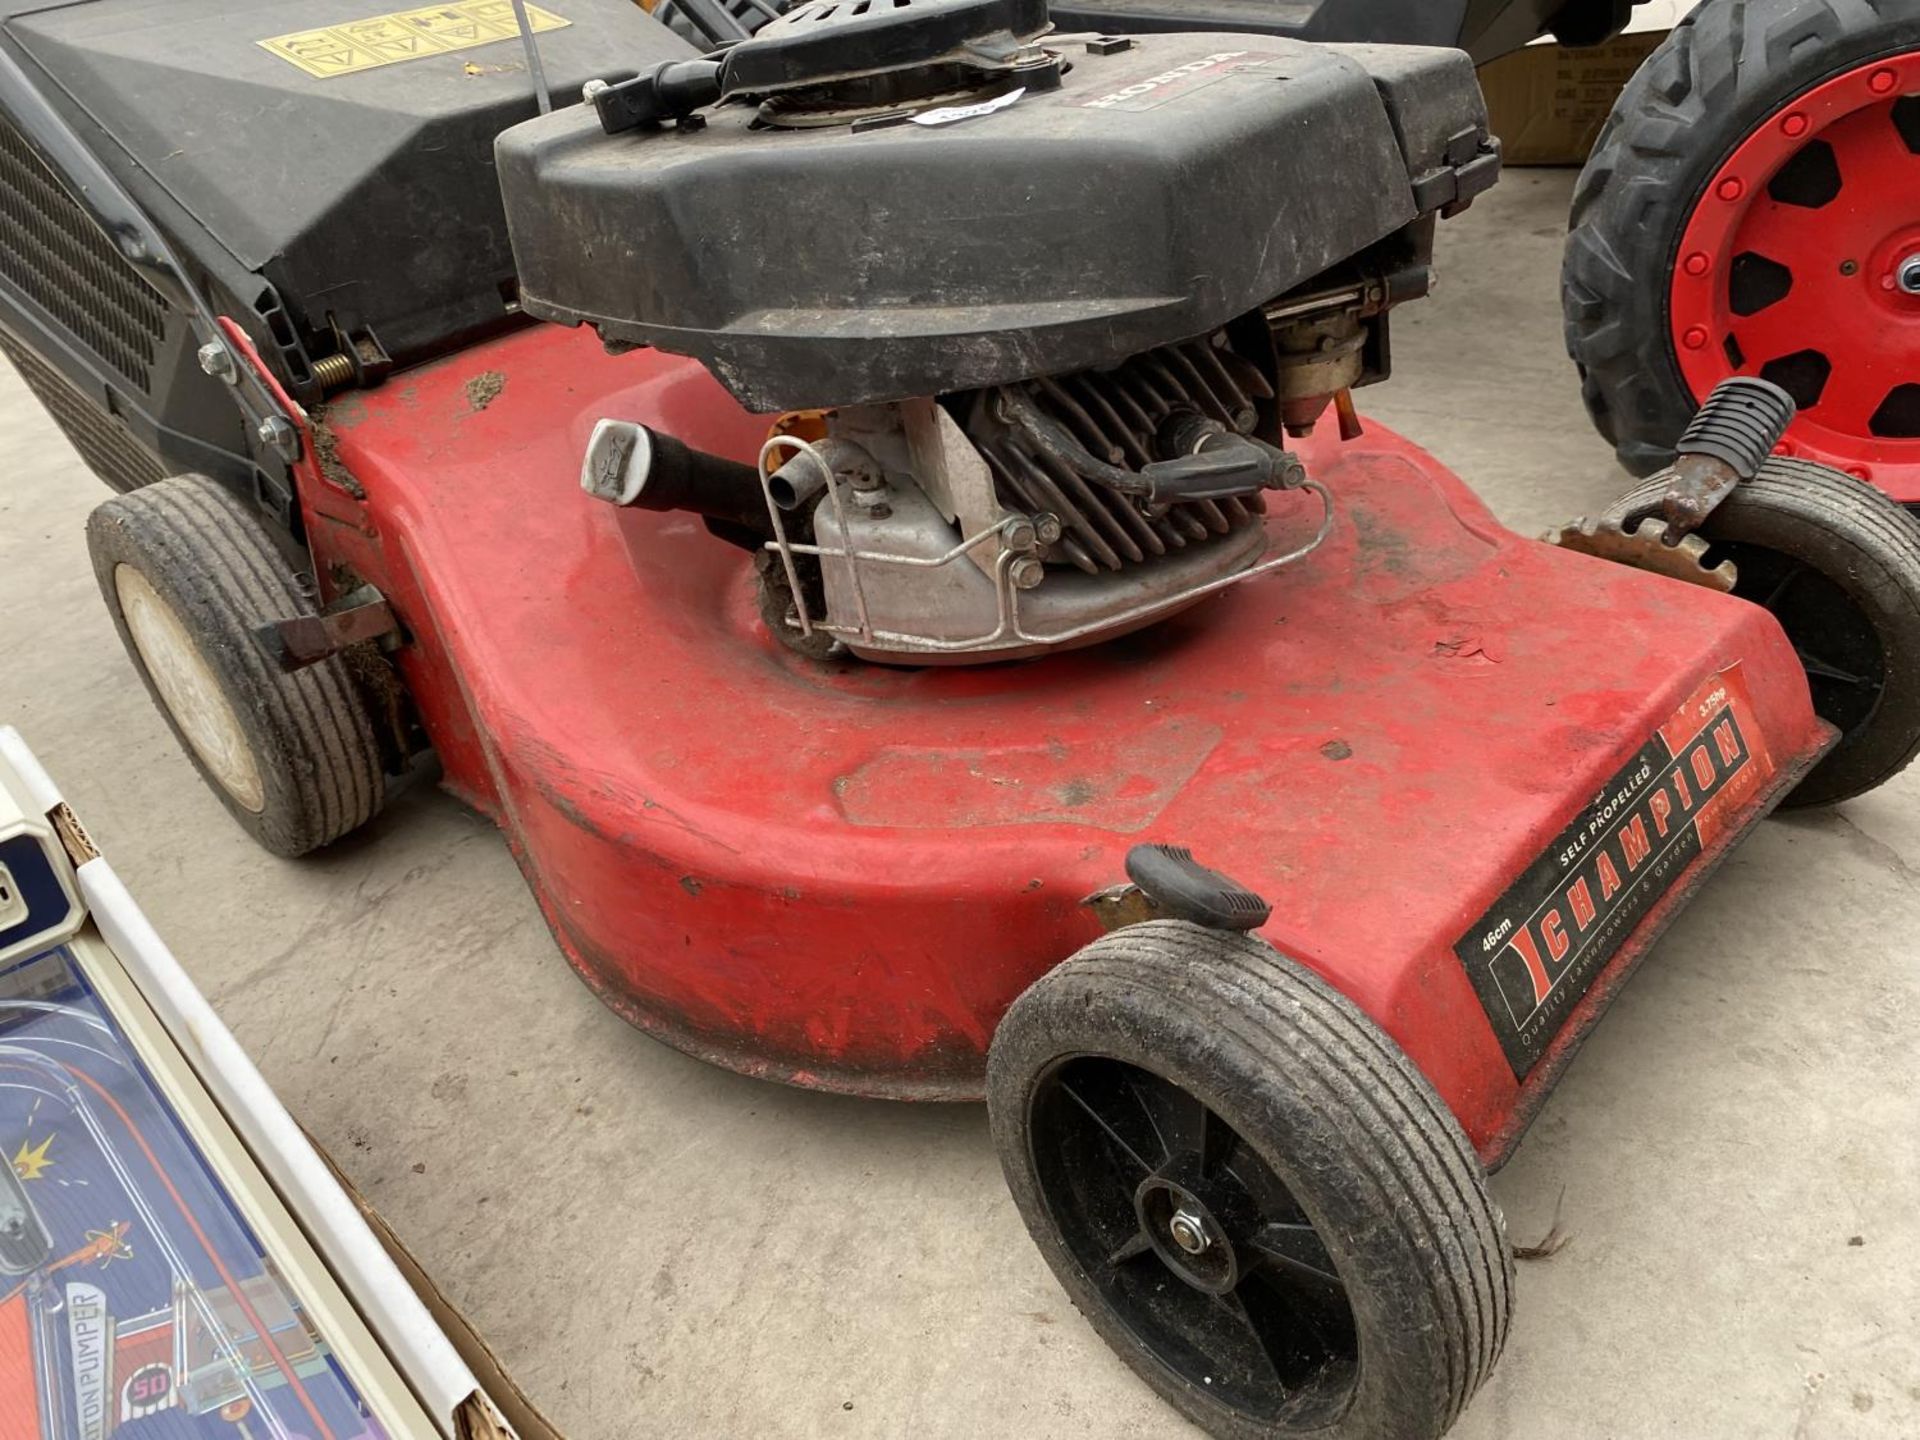 A CHAMPION LAWN MOWER WITH HONDA PETROL ENGINE AND GRASS BOX - Image 2 of 2